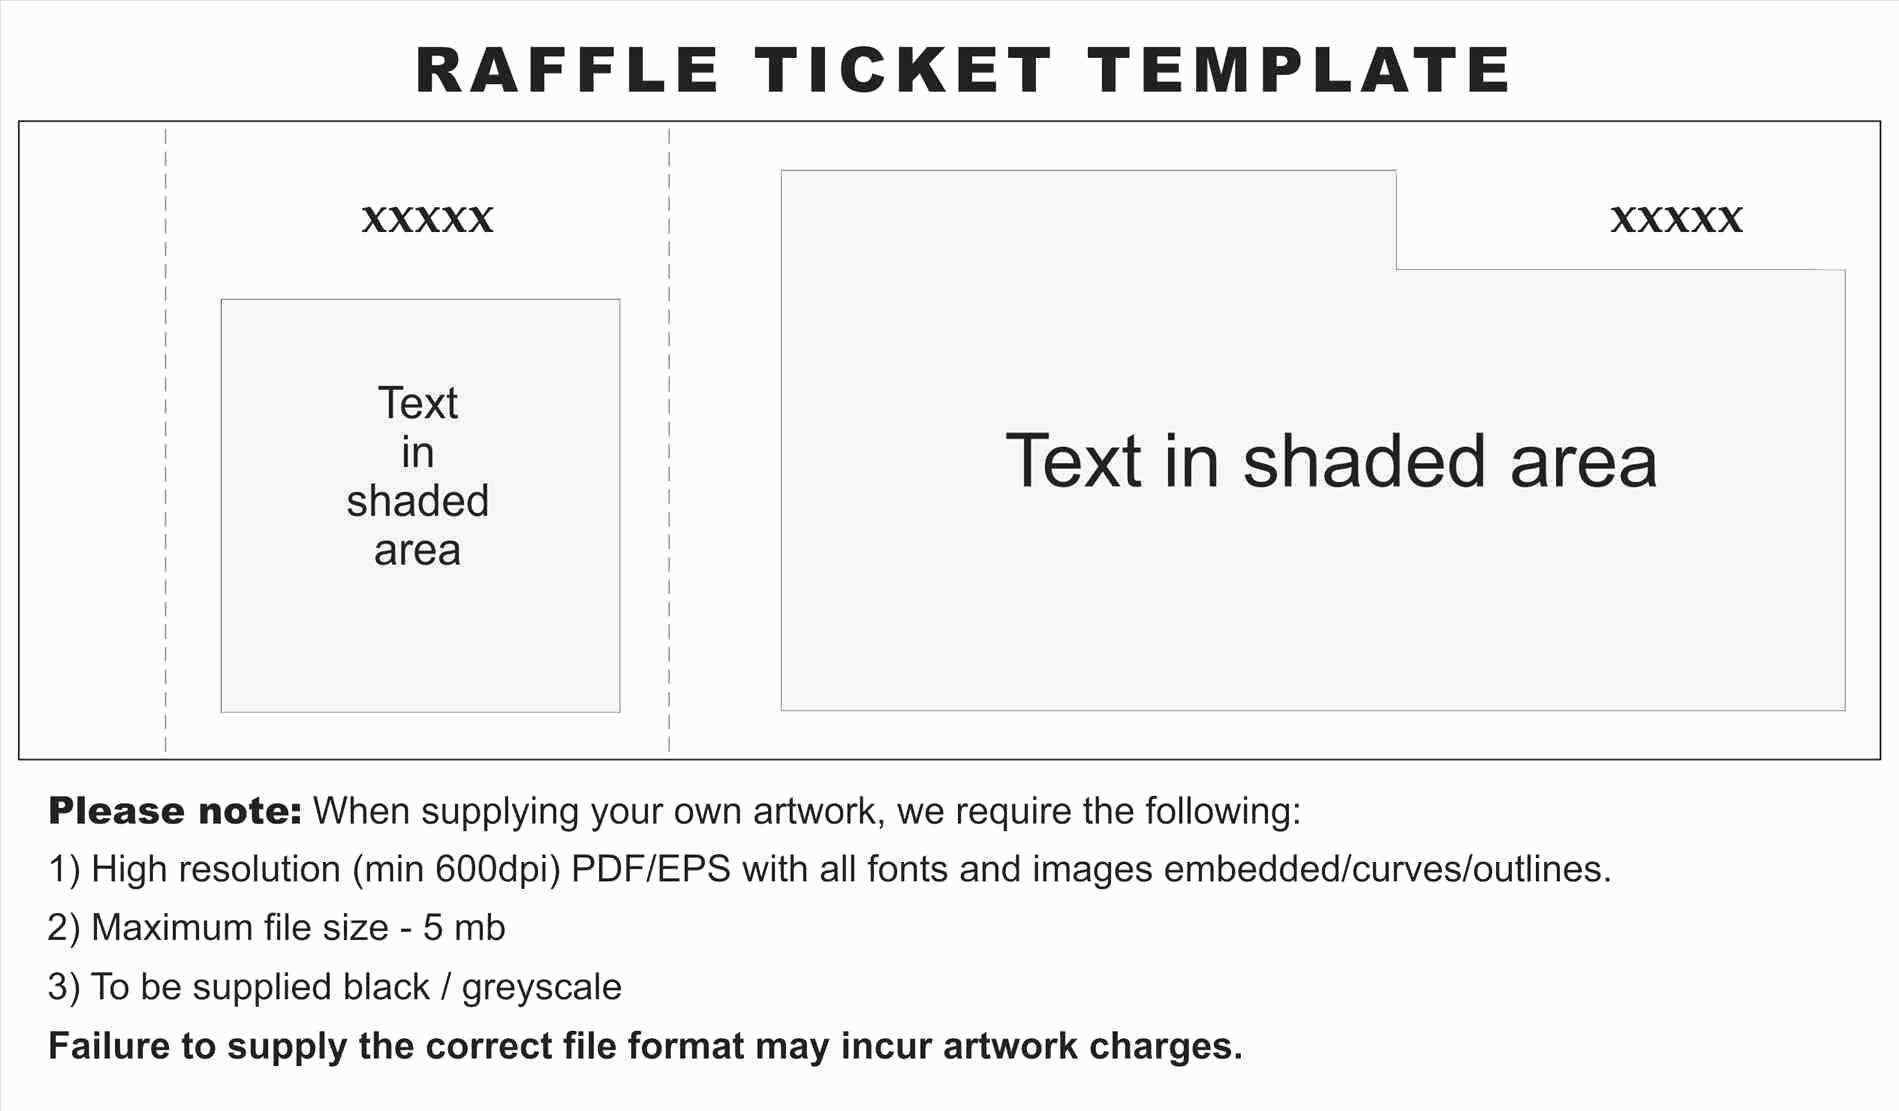 Free Printable Raffle Ticket Template Download Awesome Excel Raffle - Free Printable Raffle Ticket Template Download